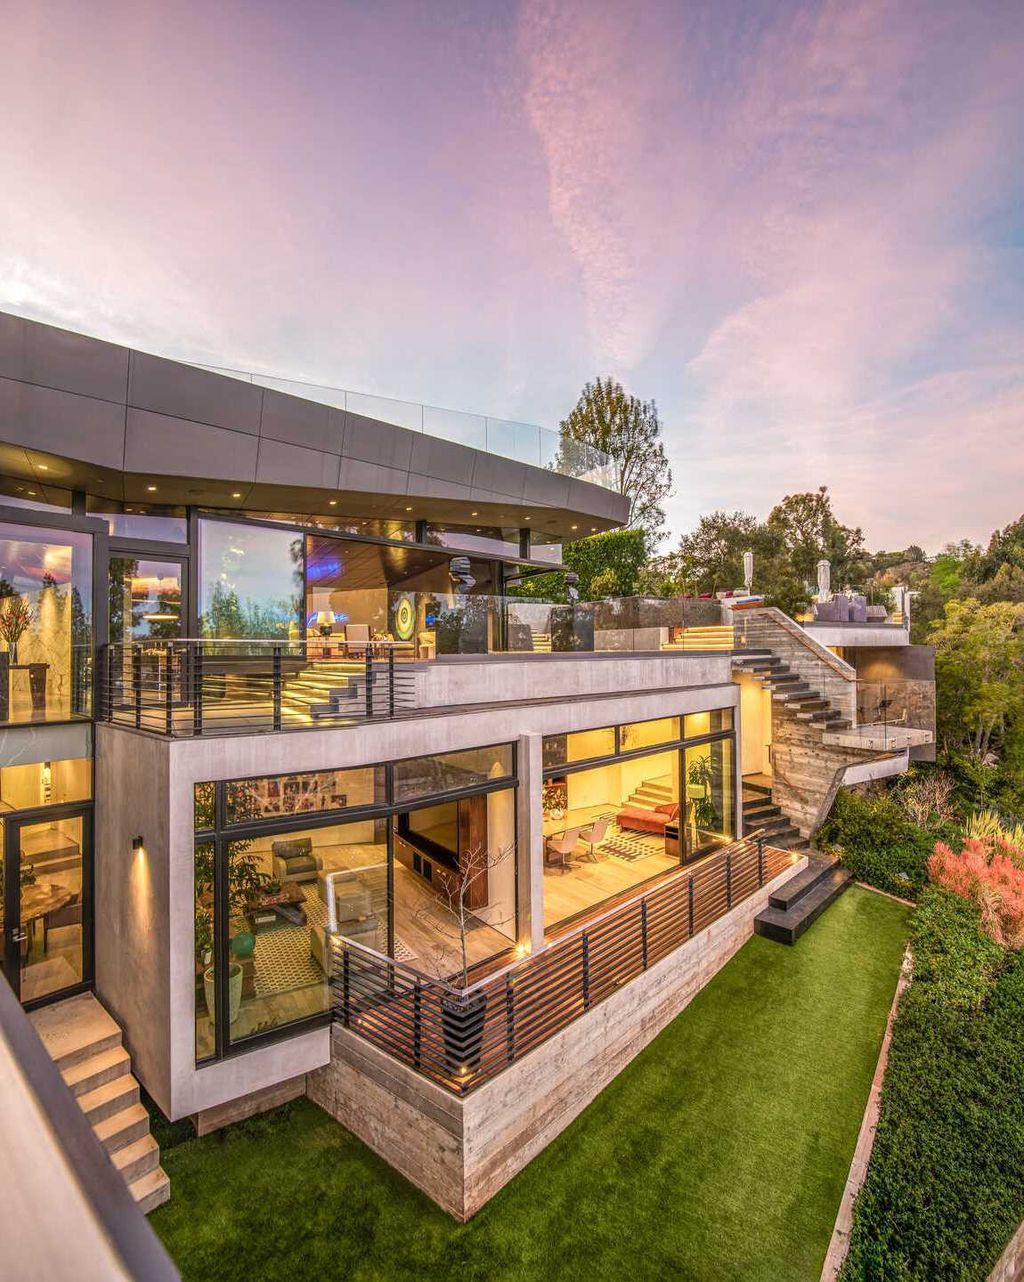 The Architectural Home in Brentwood is an ultra modern design to create comfortable and modern living spaces now available for sale. This home located at 314 N Barrington Ave, Los Angeles, California; offering 5 bedrooms and 9 bathrooms with over 8,000 square feet of living spaces.